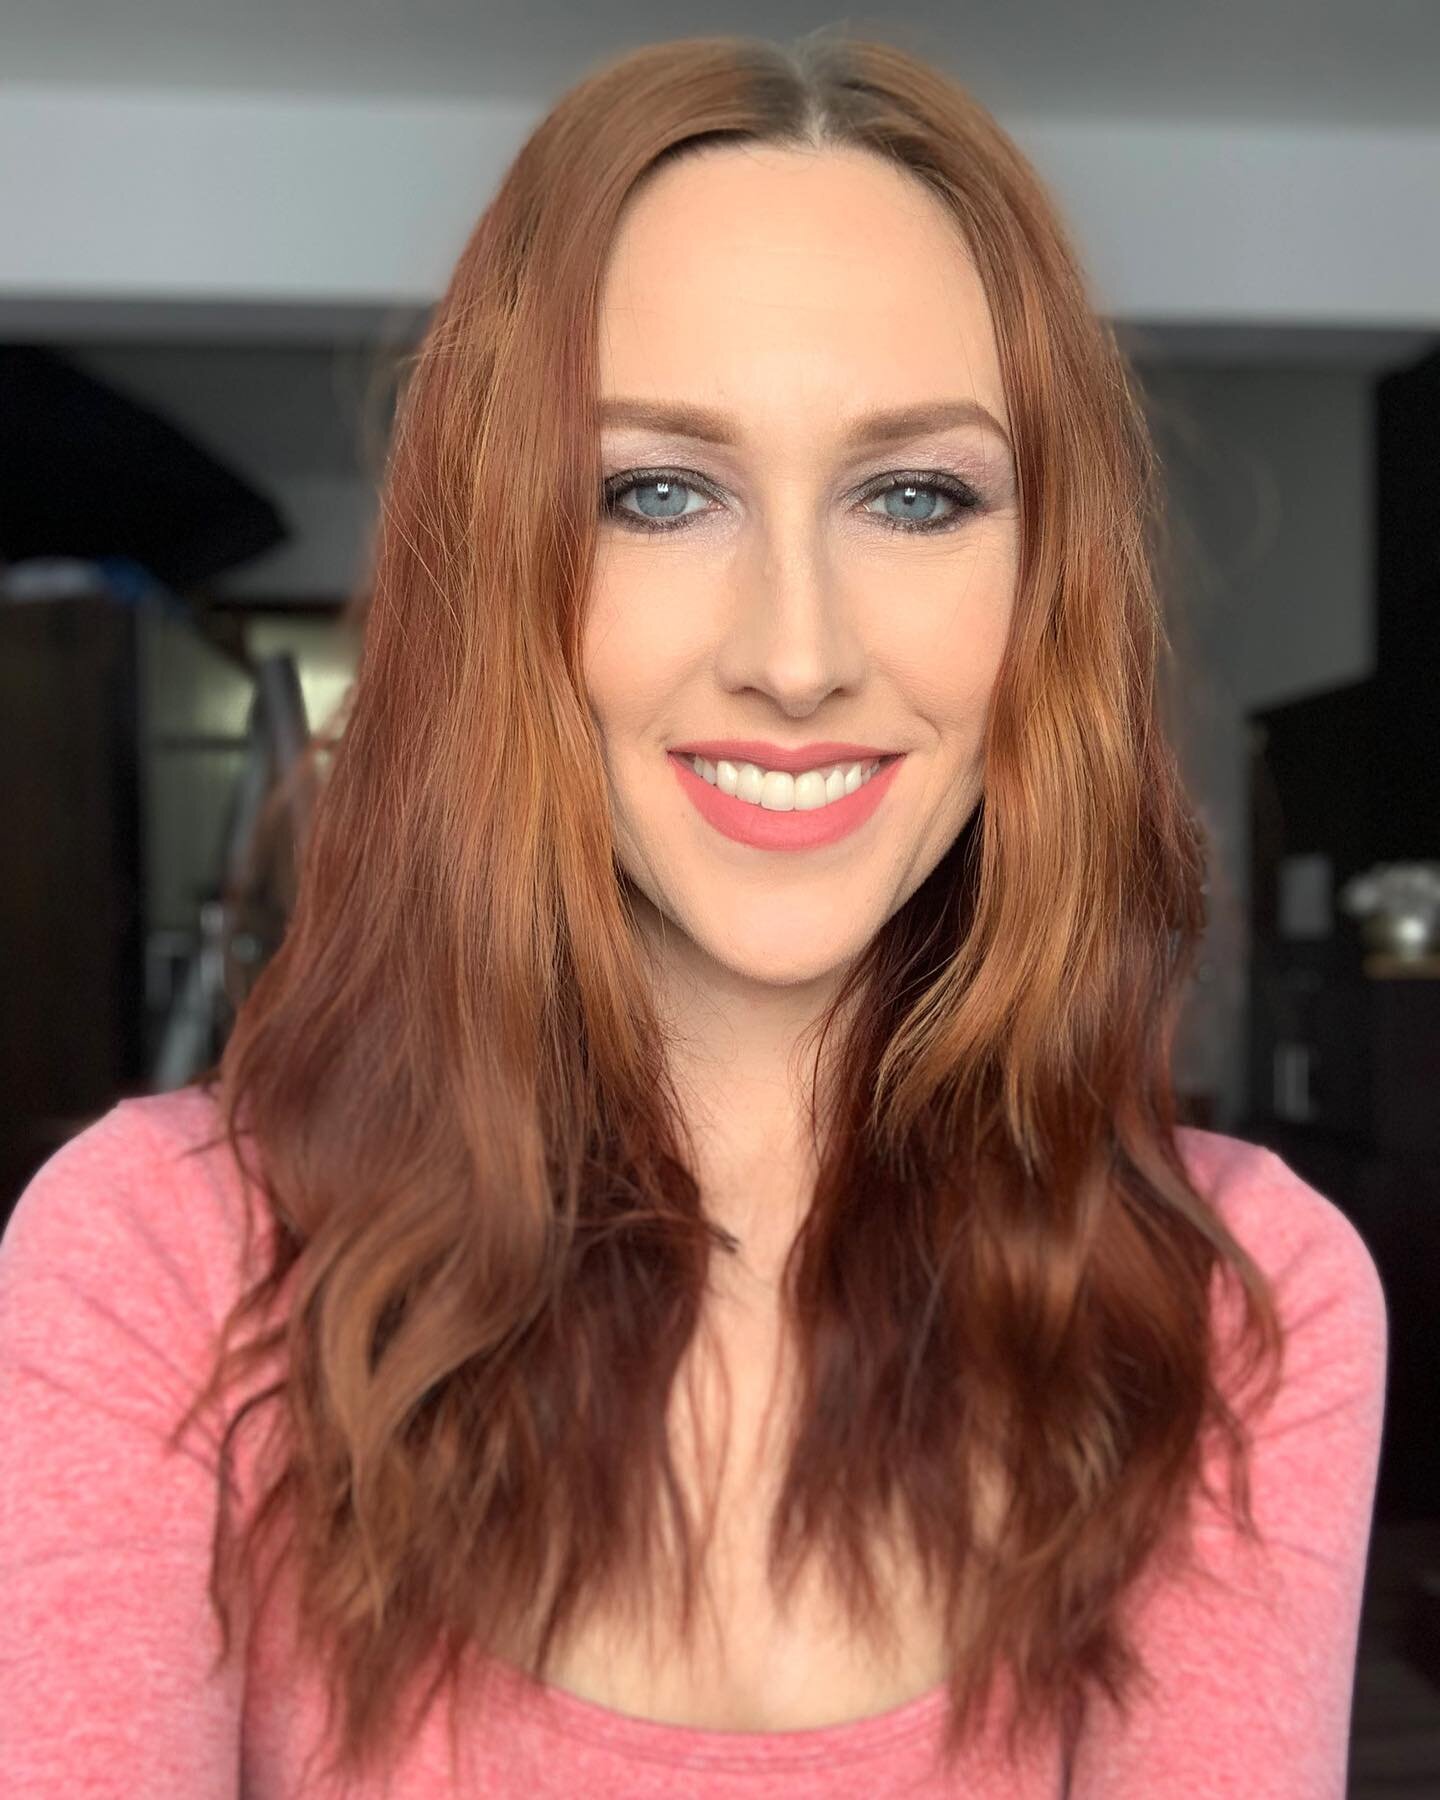 Check out the tags to see the products I used and shop! 

#makeup #mattelips #redheads #mascara #minnesota #minneapolis #carynmodels